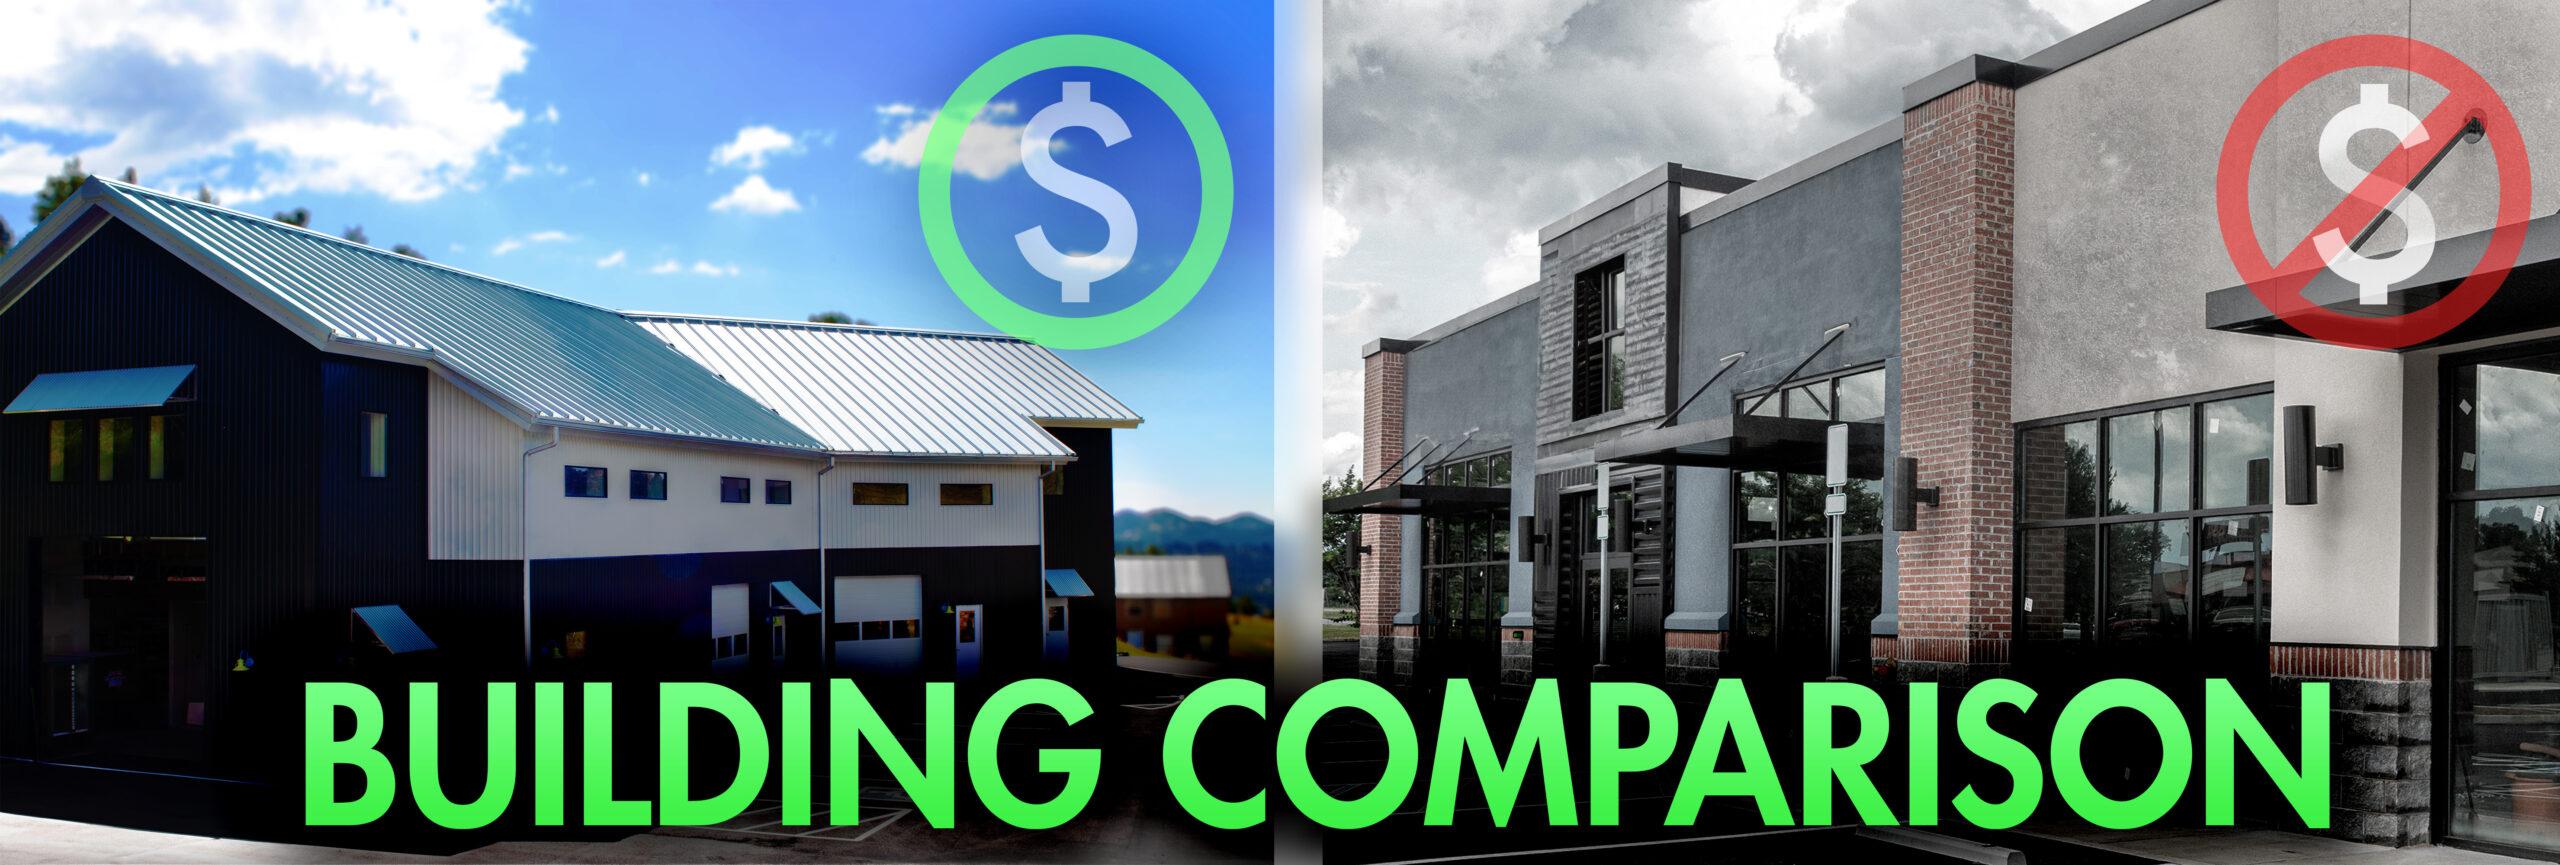 Custom Steel Buildings vs. Traditional Construction: A Side-by-Side Comparison